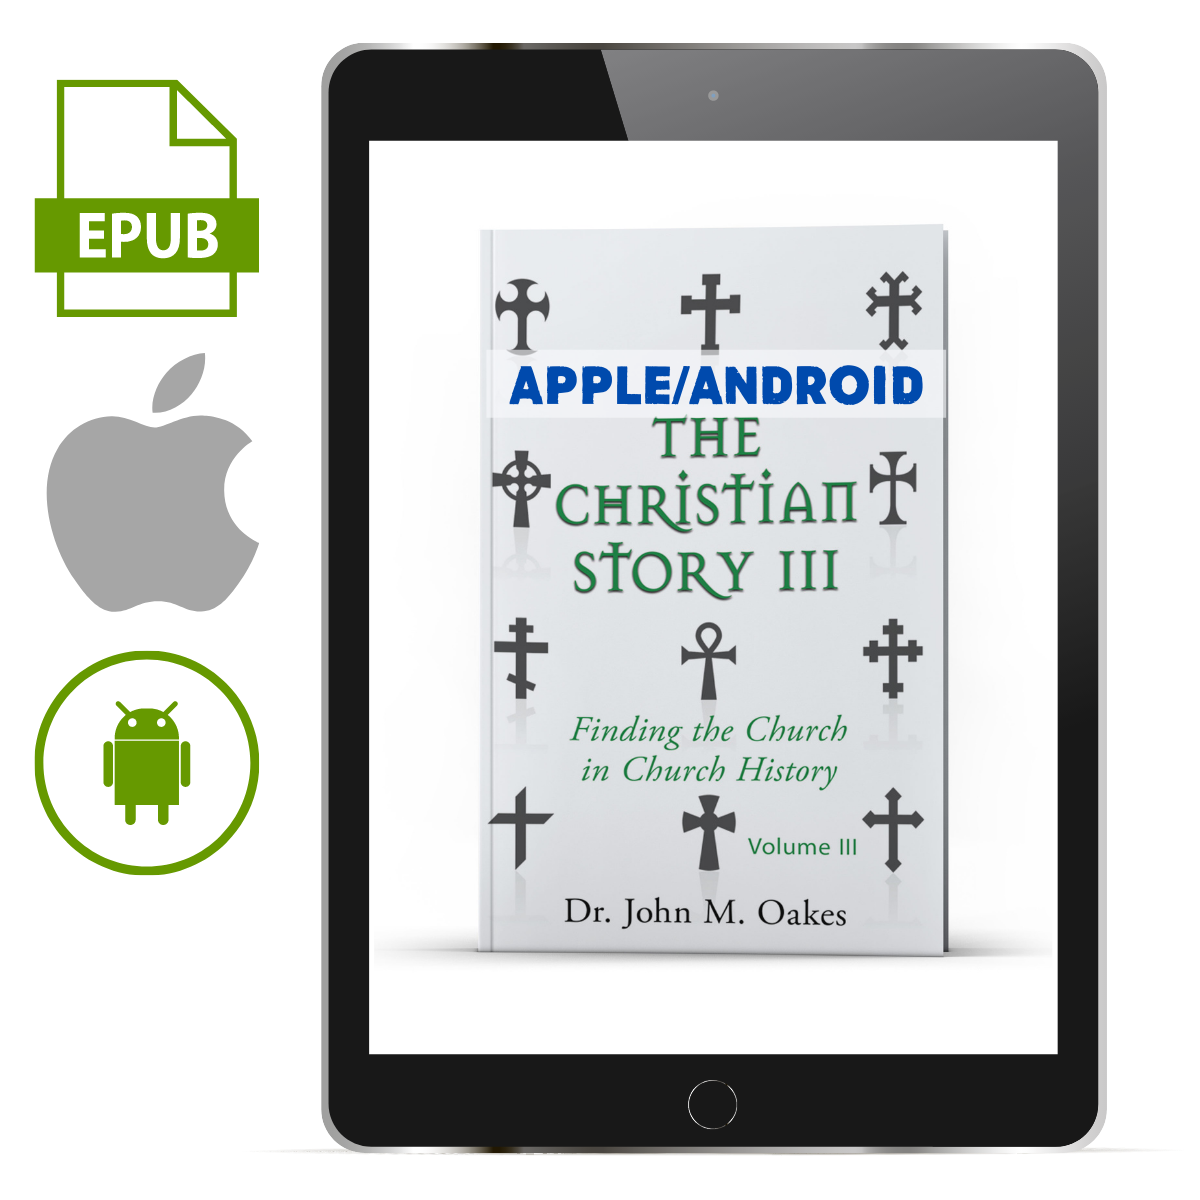 The Christian Story Vol 3 Apple/Android - Illumination Publishers